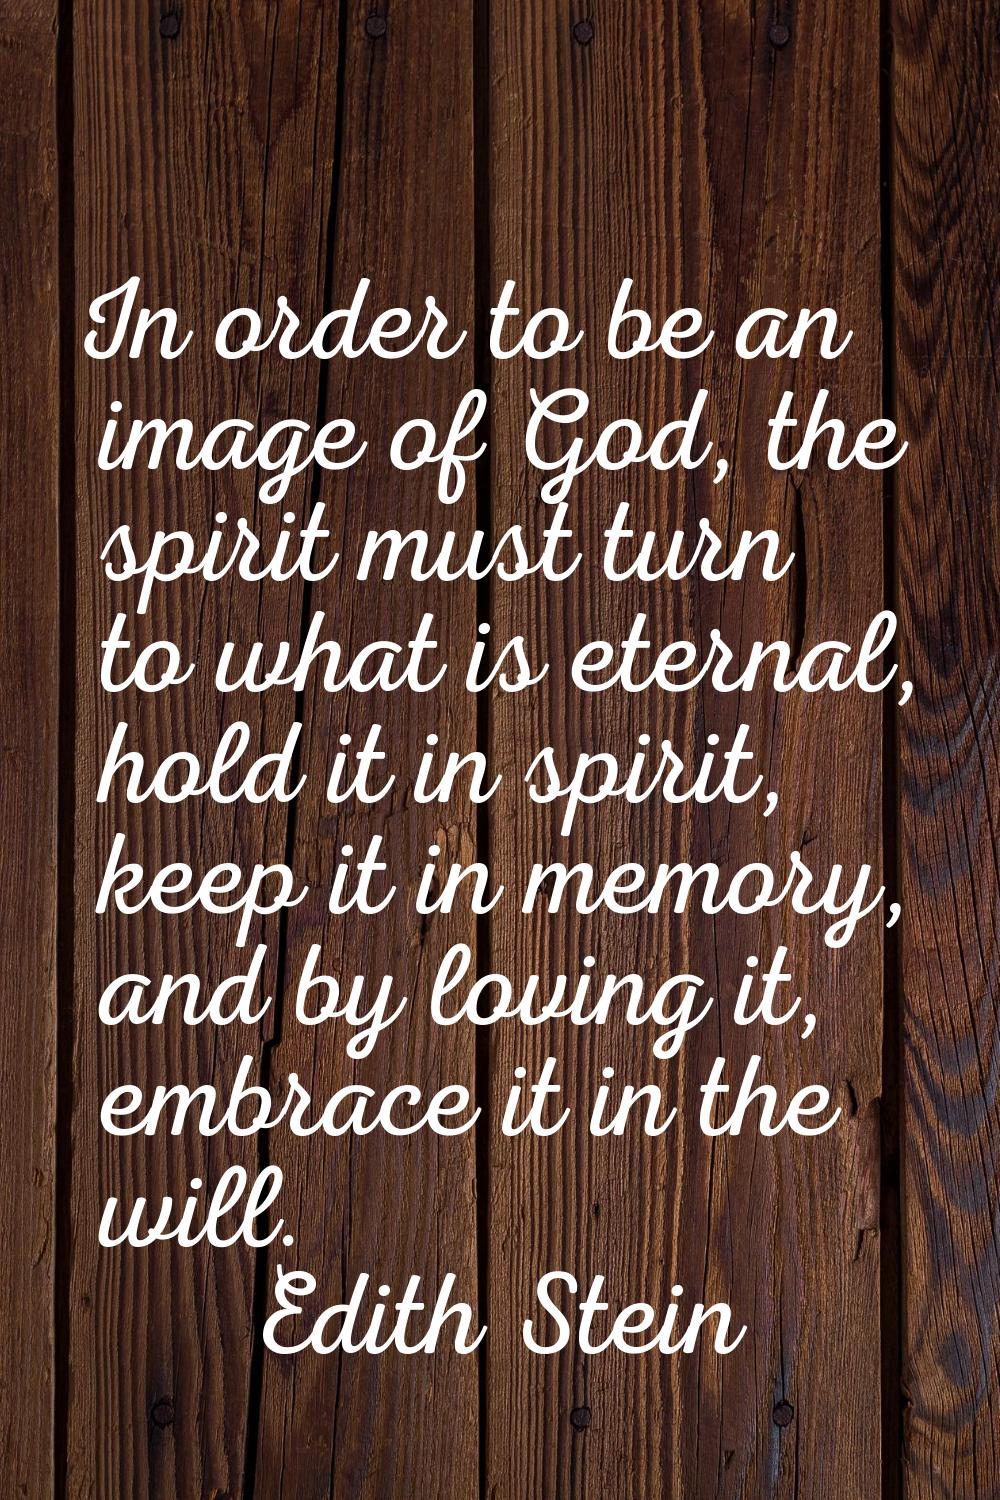 In order to be an image of God, the spirit must turn to what is eternal, hold it in spirit, keep it